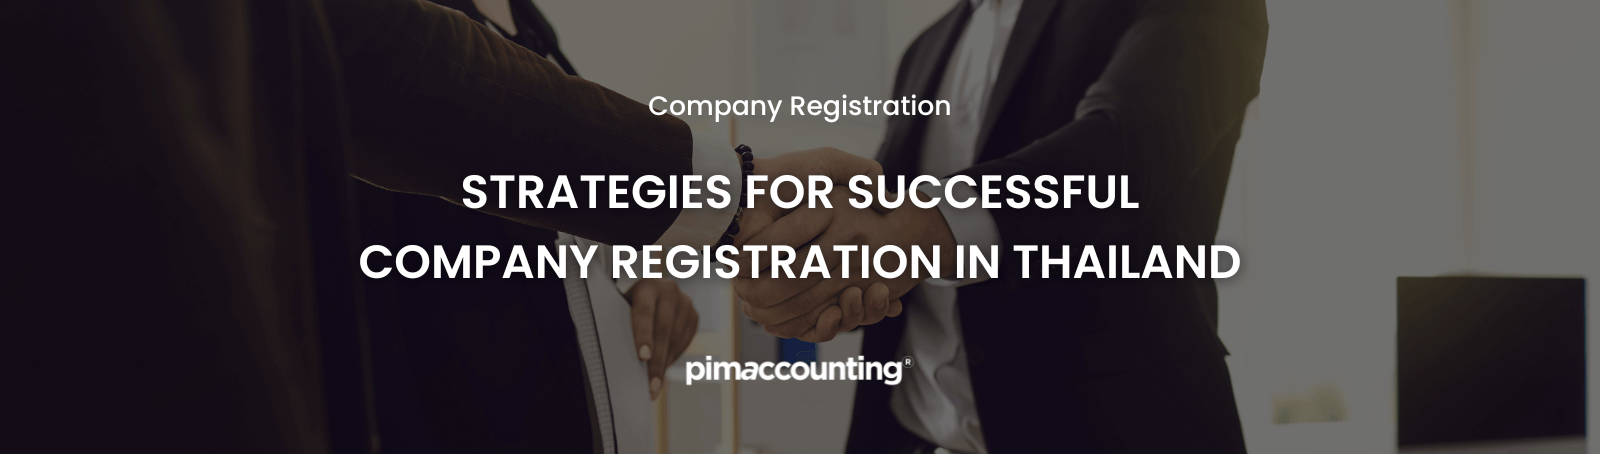 Strategies for Successful Company Registration in Thailand